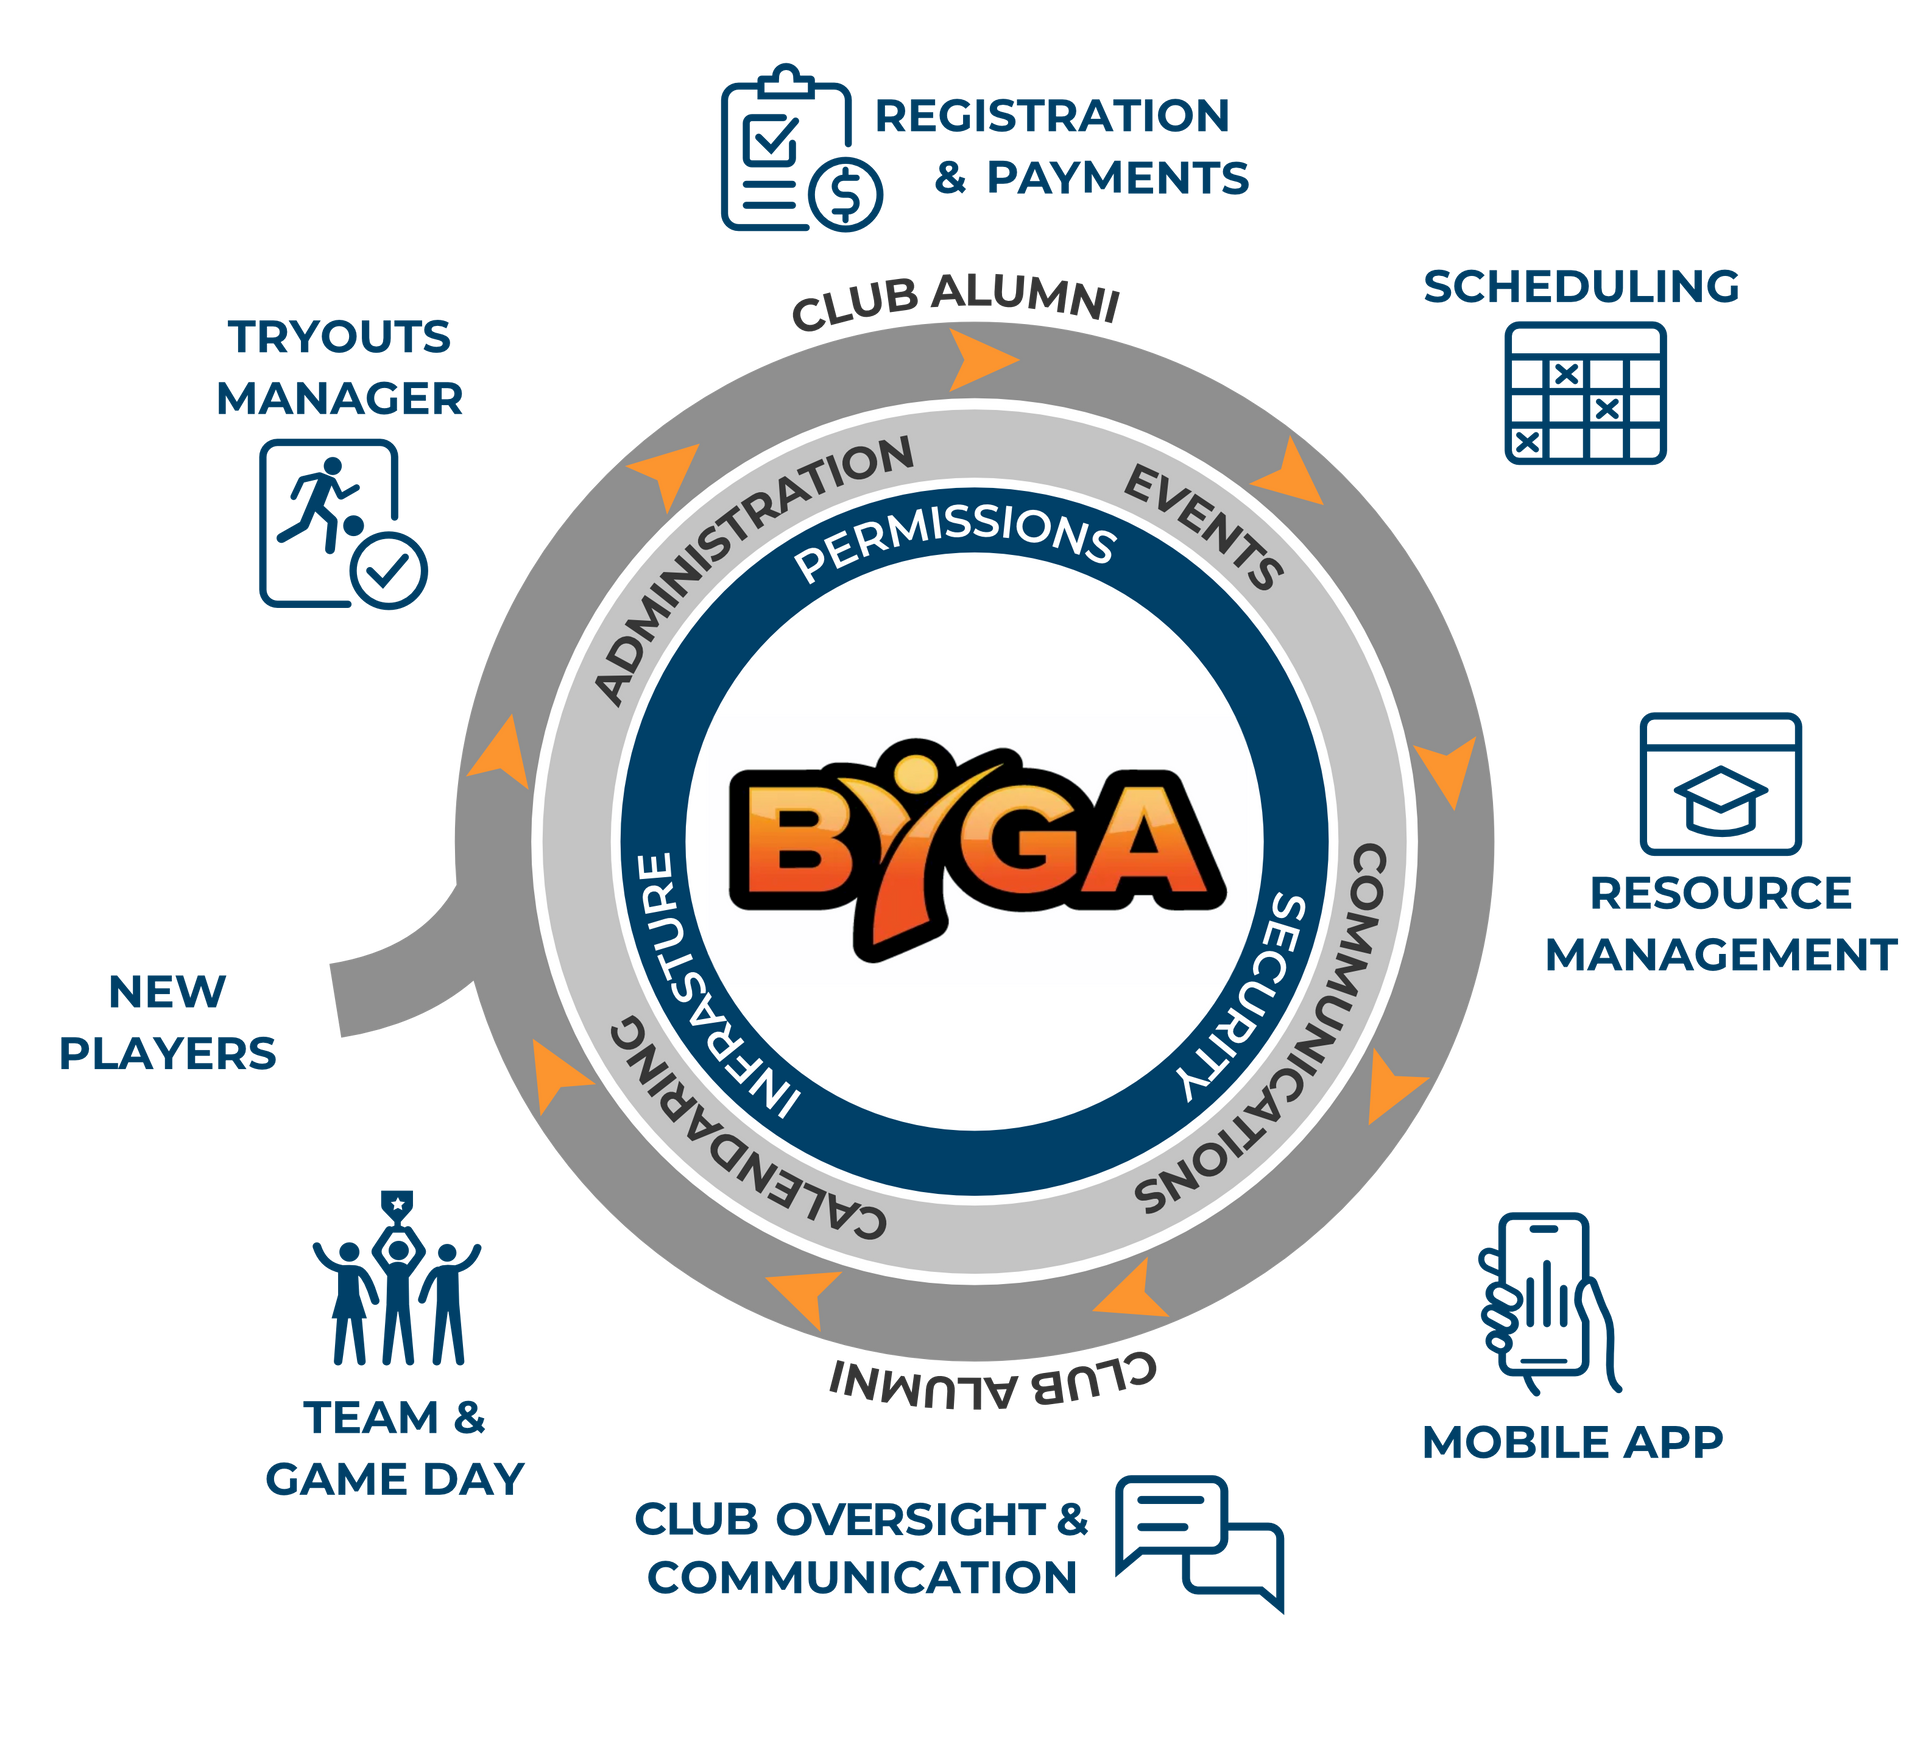 Byga youth sports club management list of features